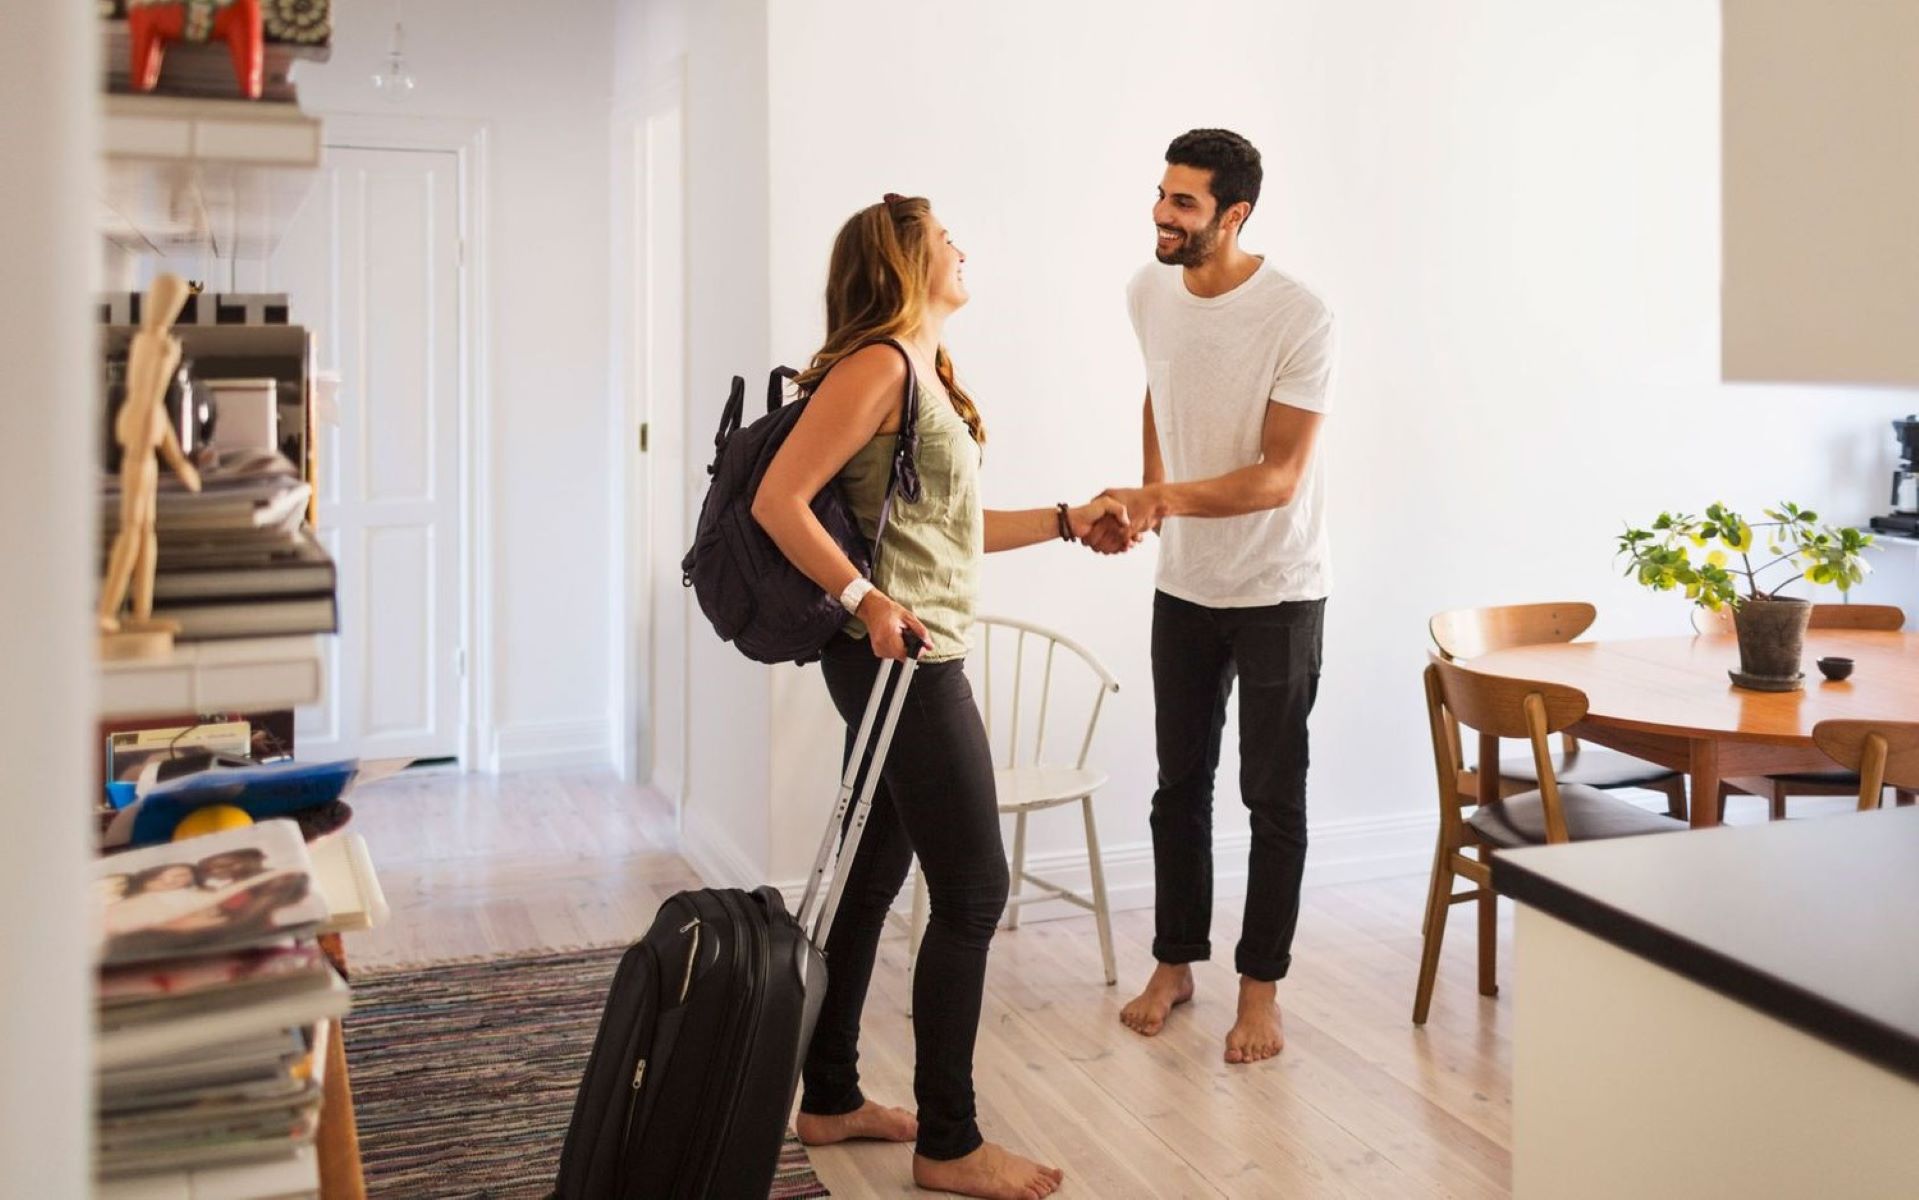 How To Become An Airbnb Co-Host